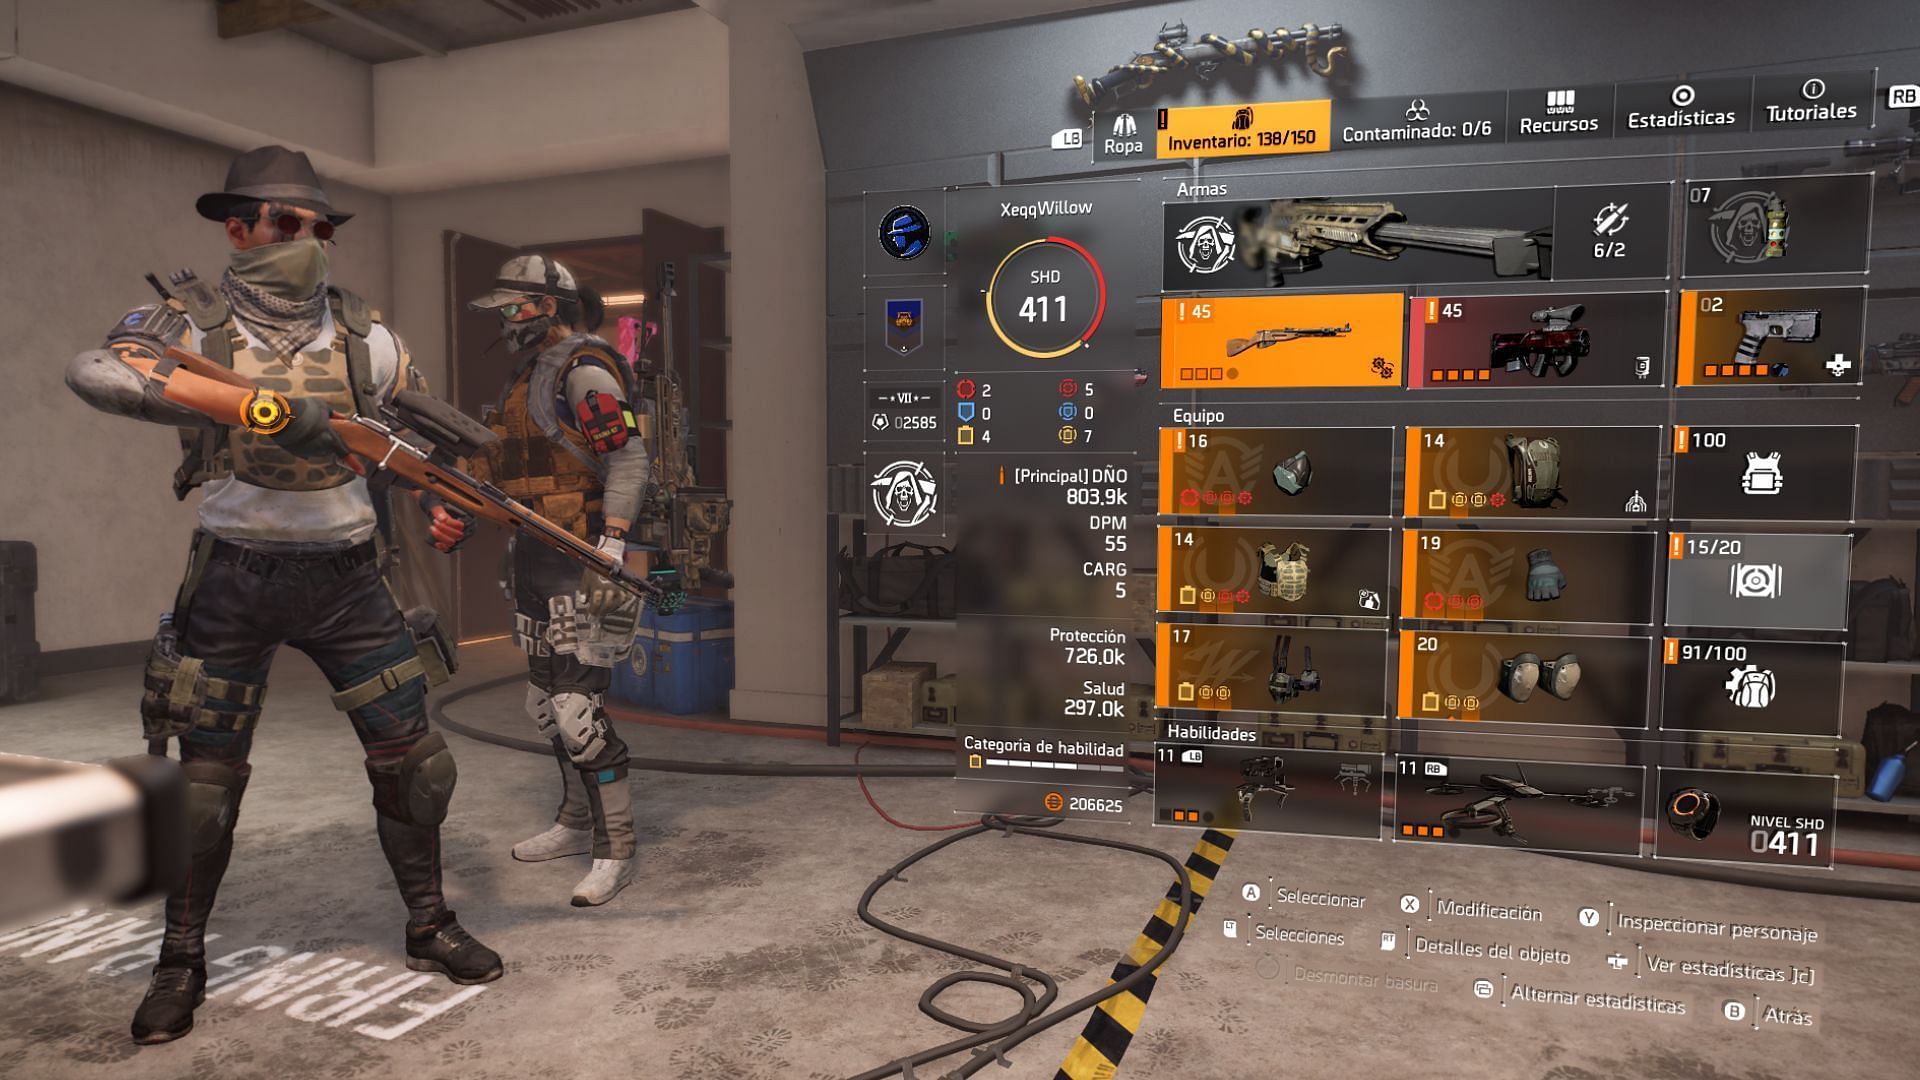 Customizing your character and weapons in The Division 2 (Image via Ubisoft)